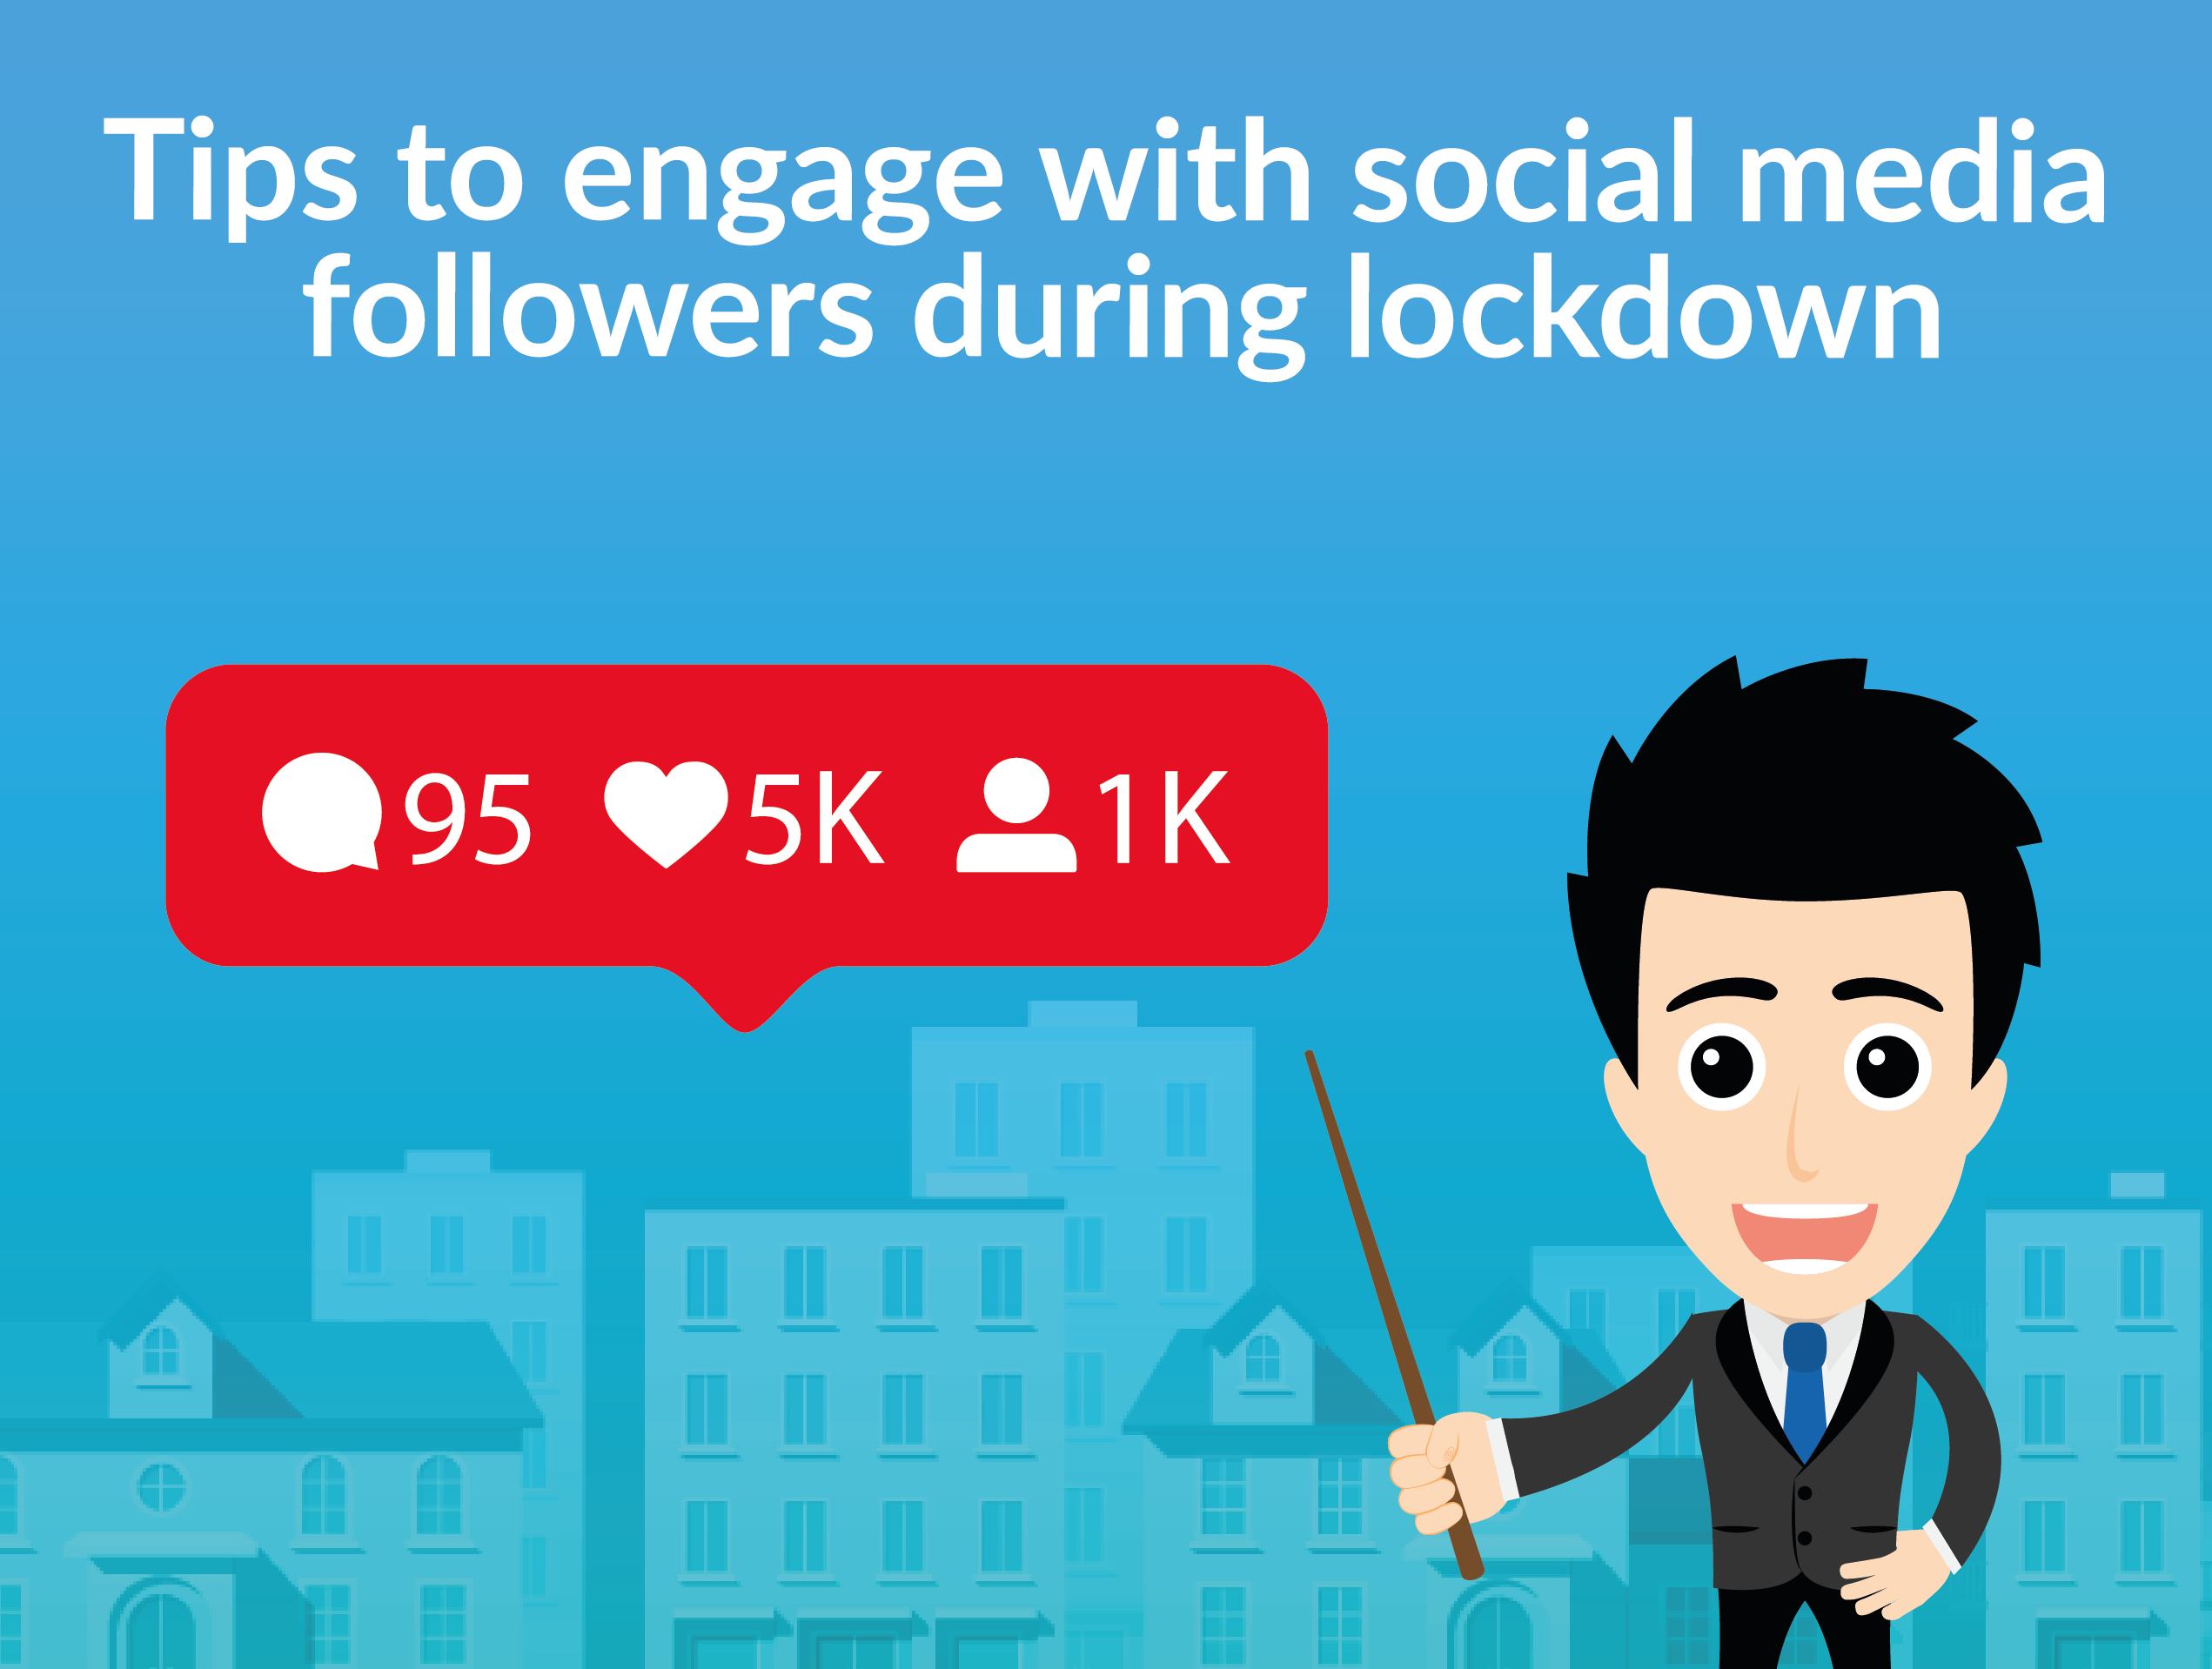 How can agents engage with social media followers during lockdown?